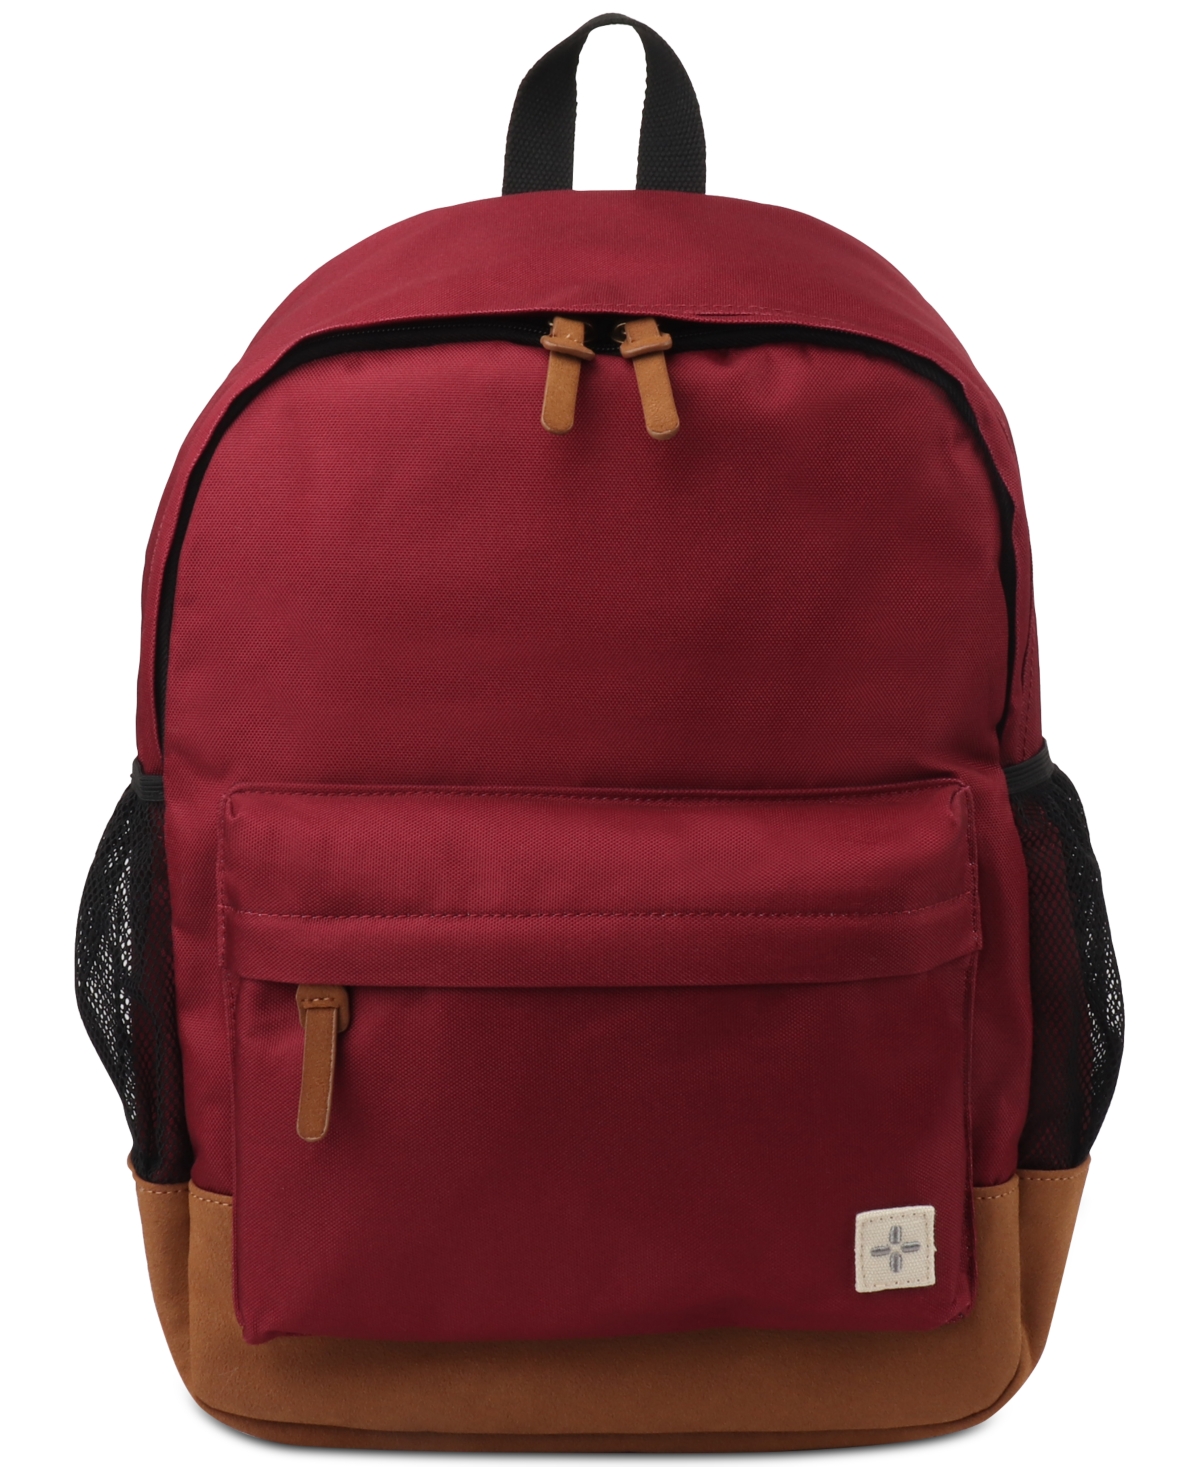 Men's Riley Solid Backpack, Created for Macy's - Burgundy